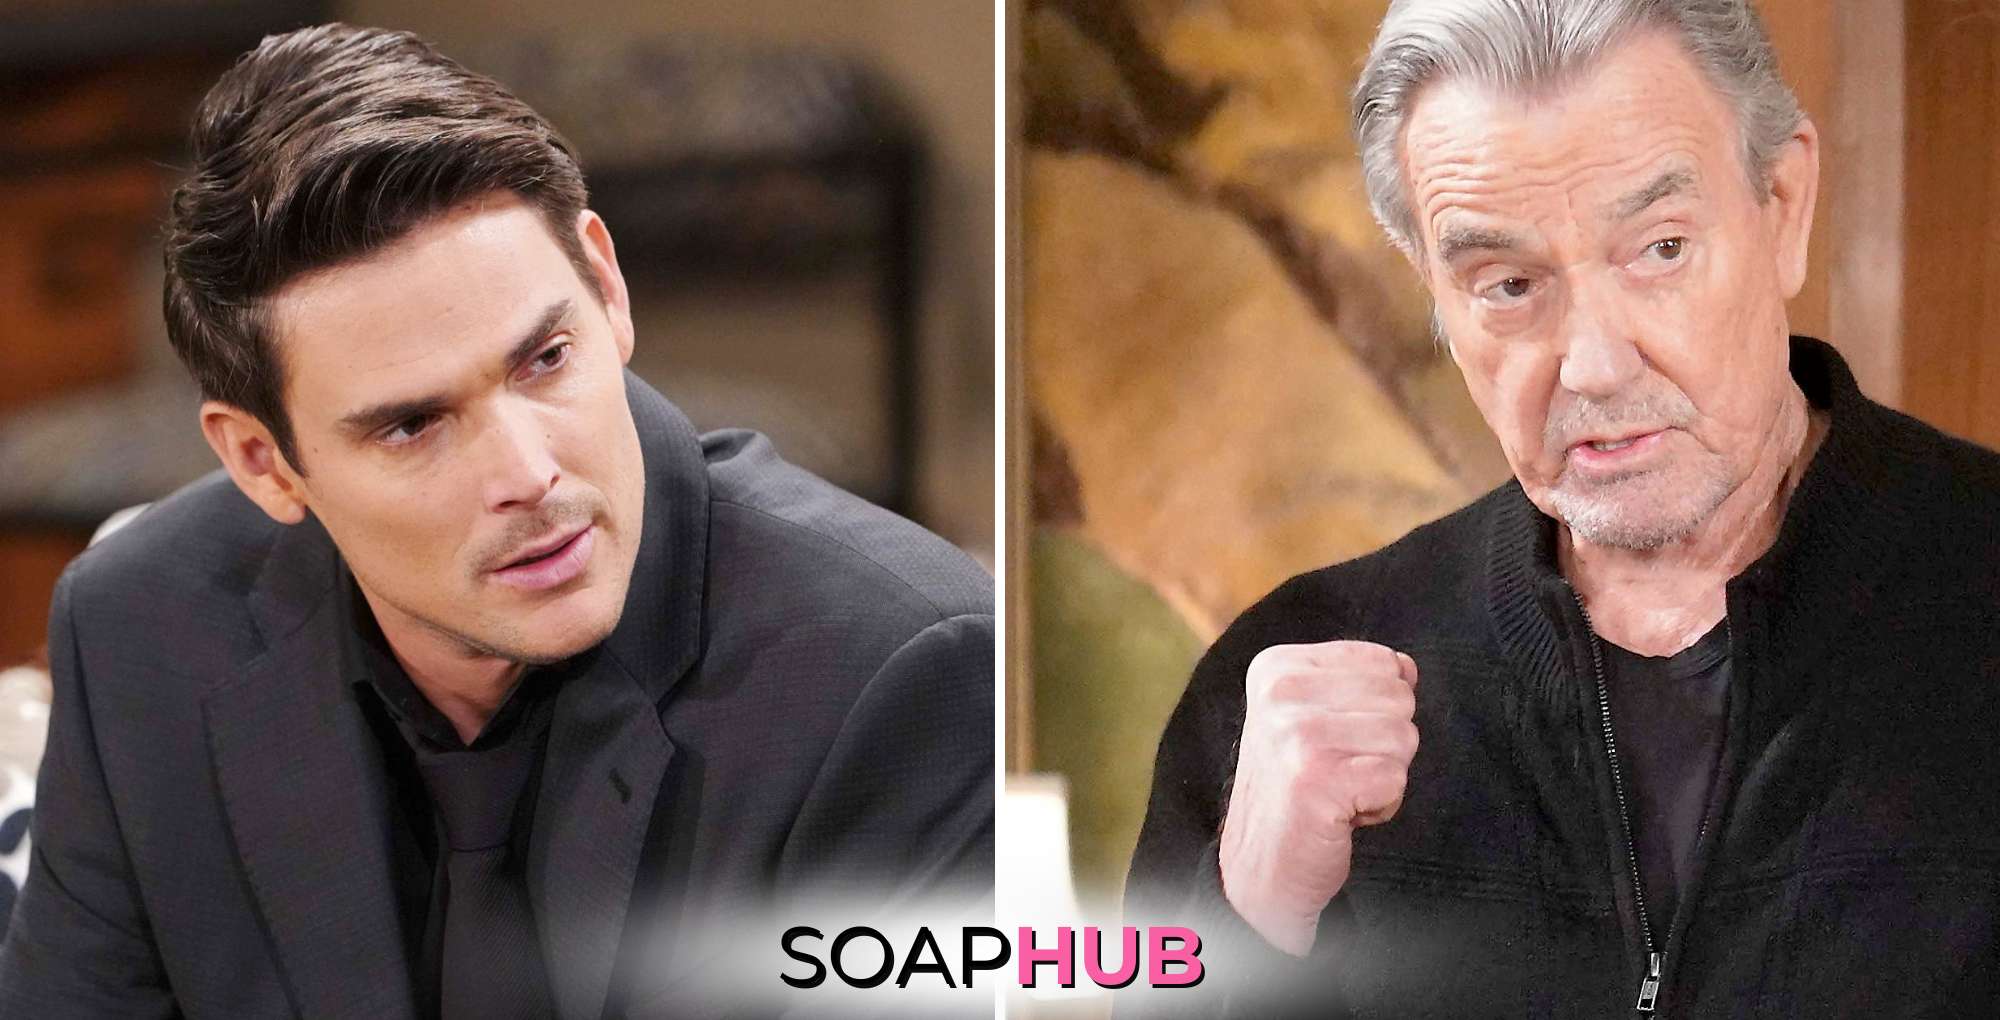 The Young and the Restless spoilers for June 18 feature Adam and Victor with the Soap Hub logo.